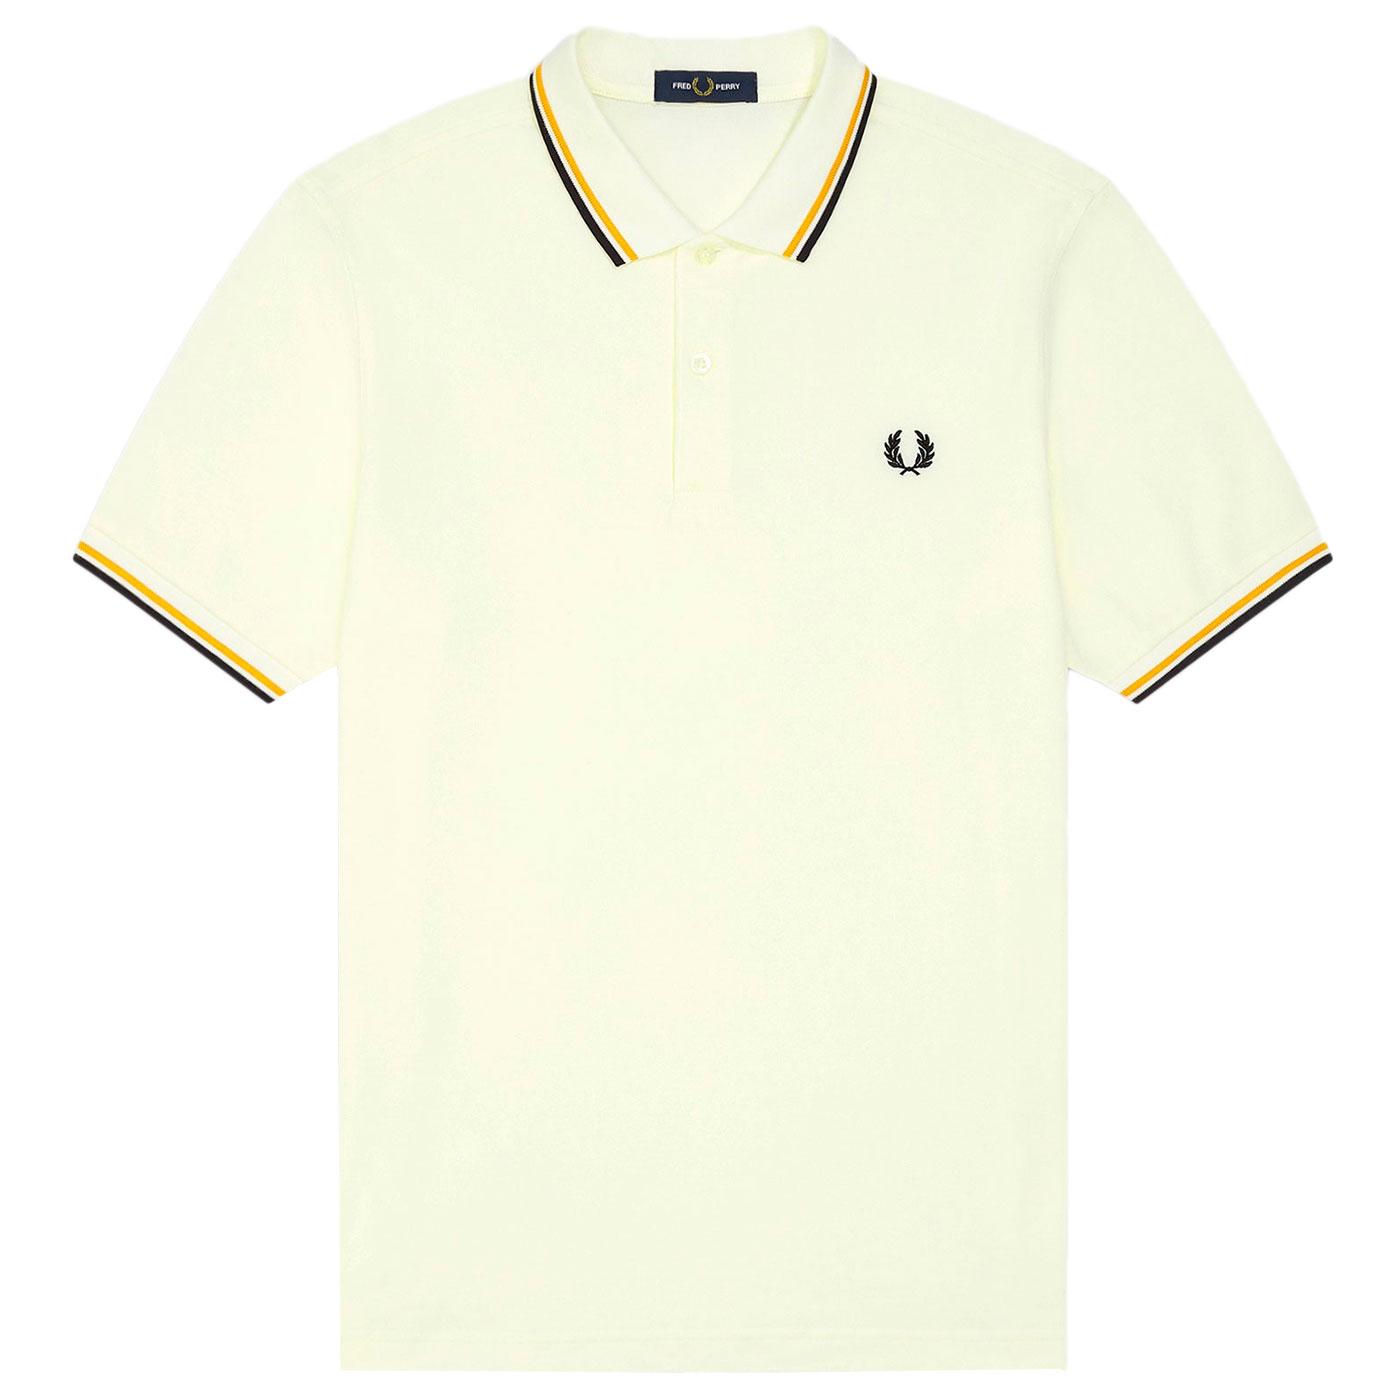 FRED PERRY M3600 Mod Twin Tipped Polo Shirt SW/G/B